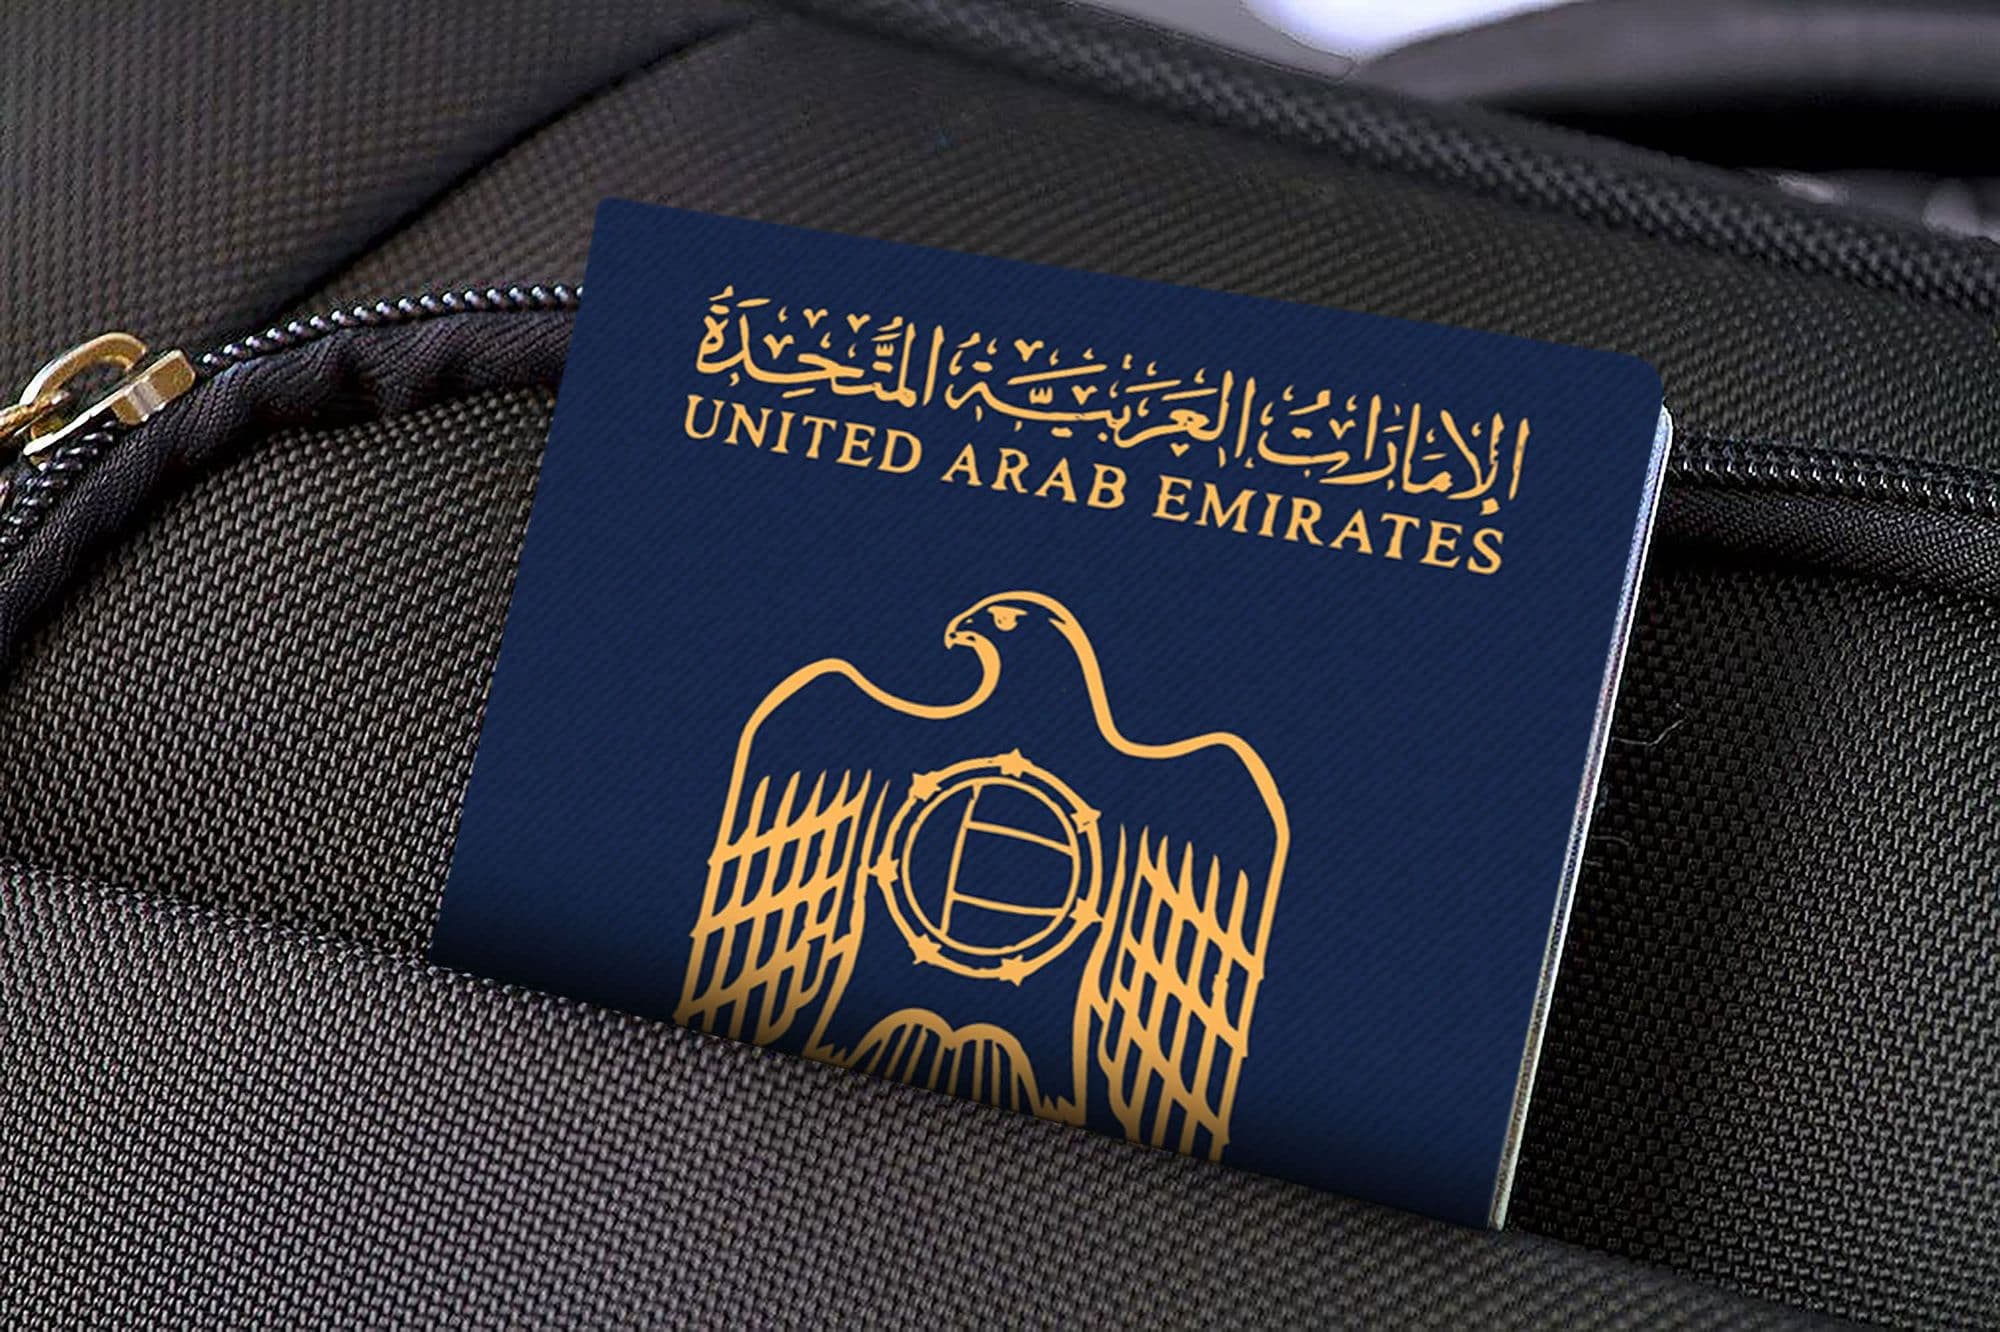 UAE Takes First Place for Visa Regulation